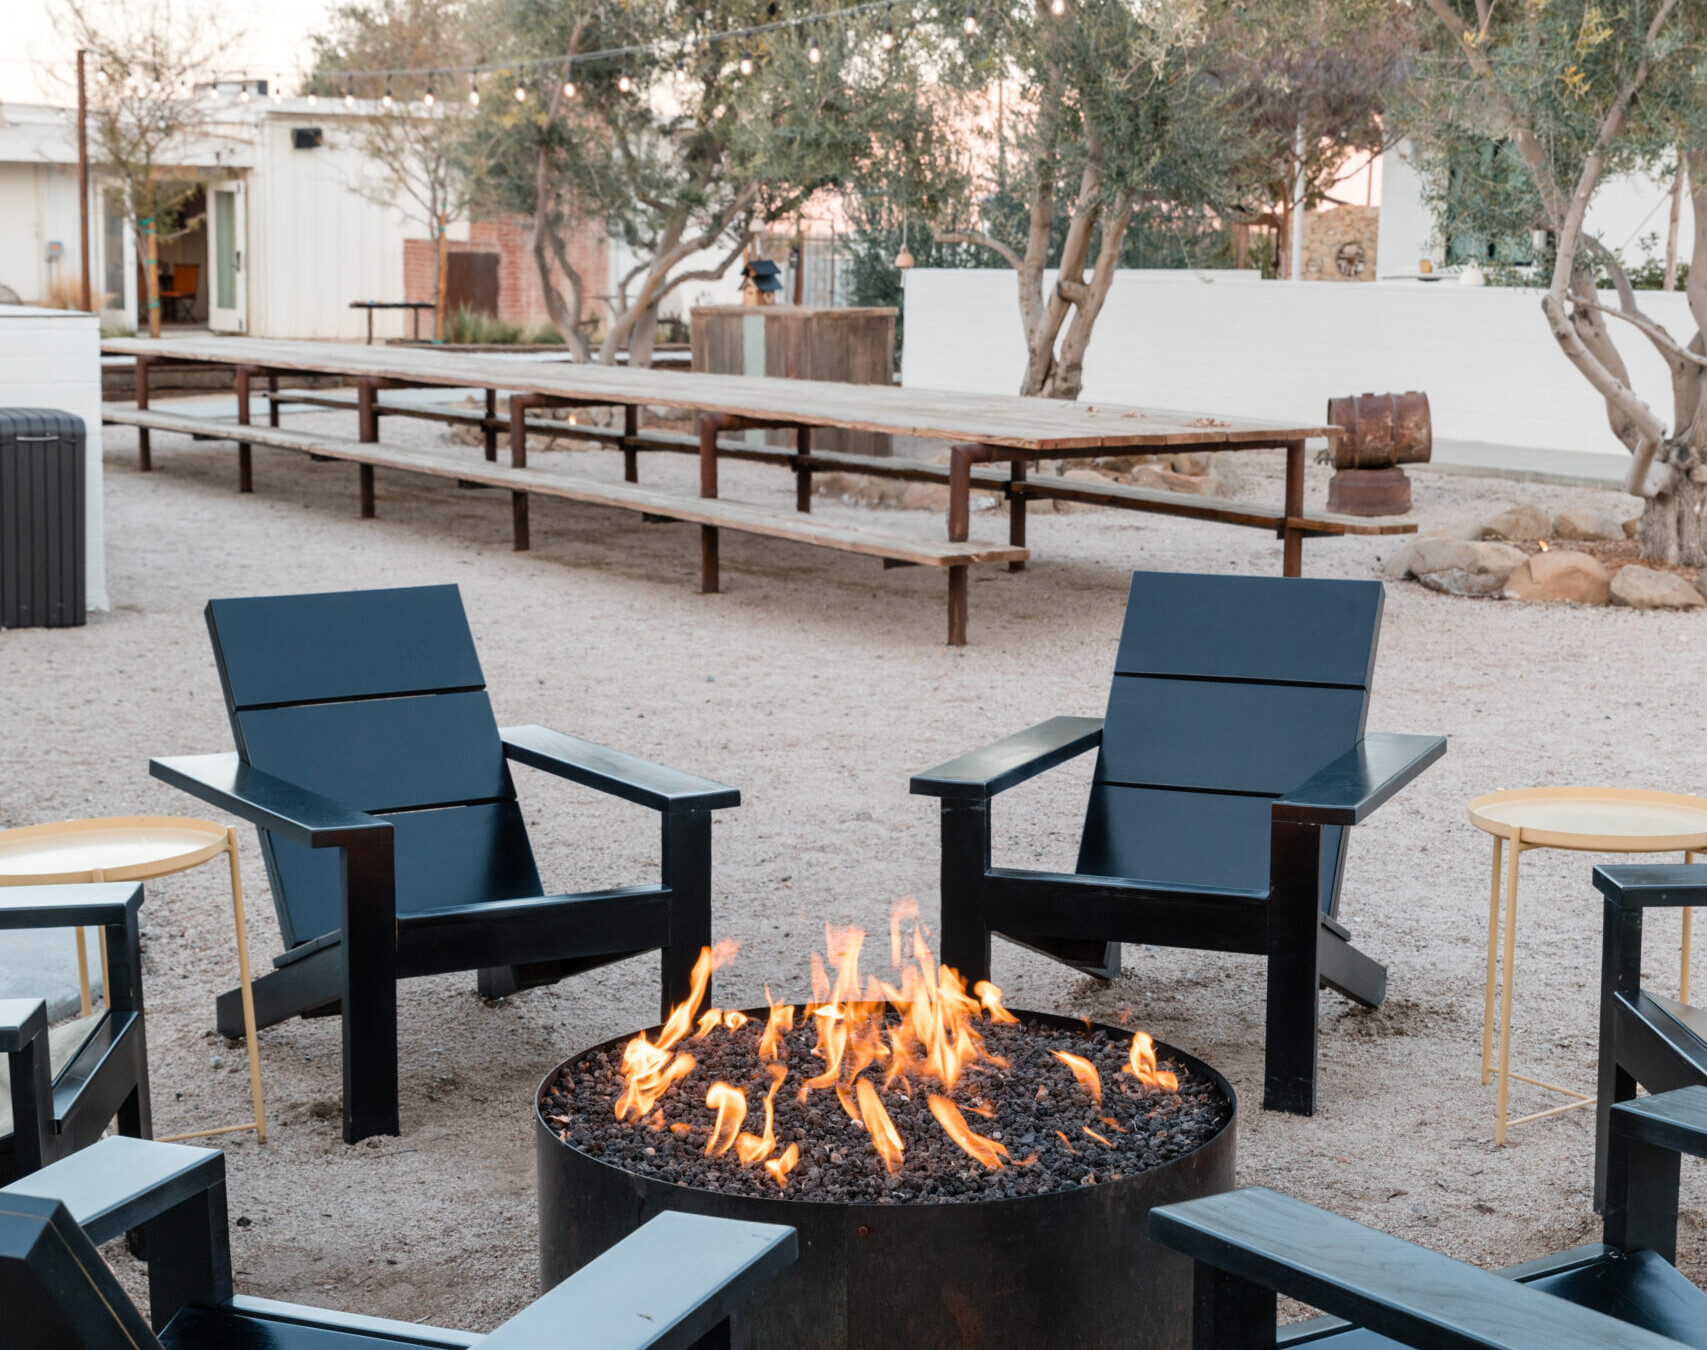 Photo of a fire pit with black wooden chairs on the ground at Cuyama Buckhorn in New Cuyama, California.